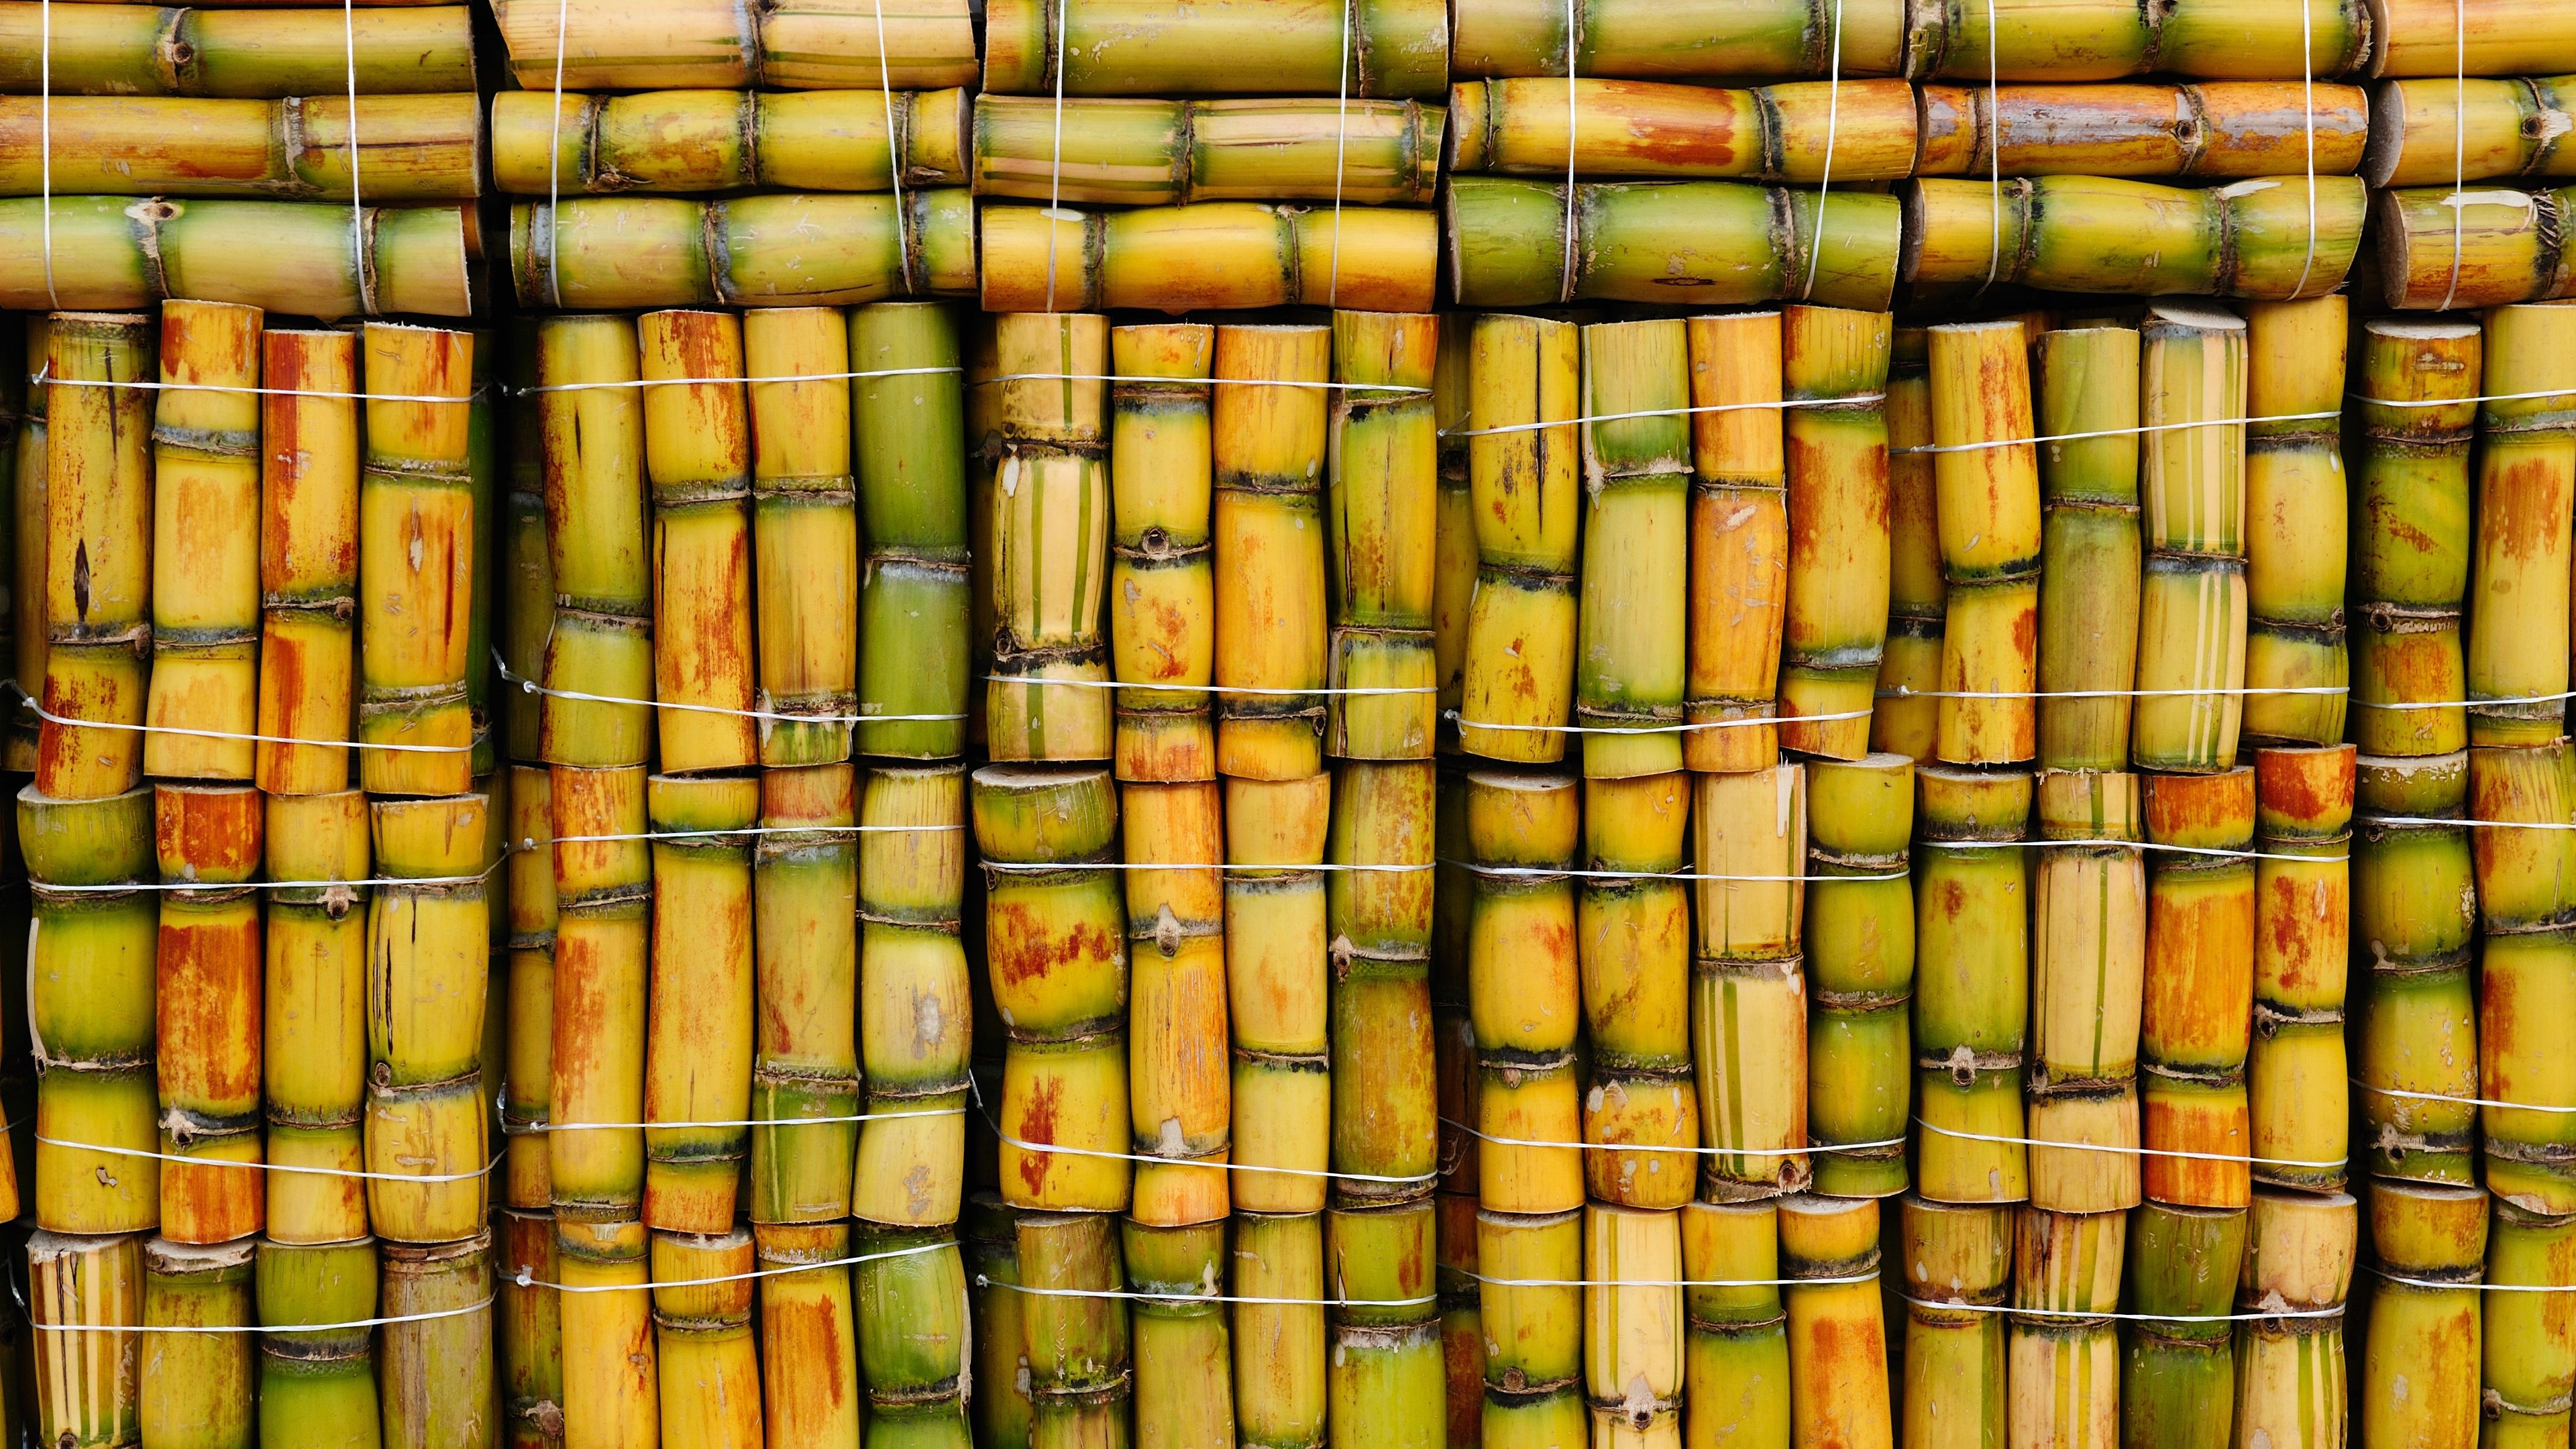 Wallpaper Sugar cane, bamboo background 3840x2160 UHD 4K Picture, Image